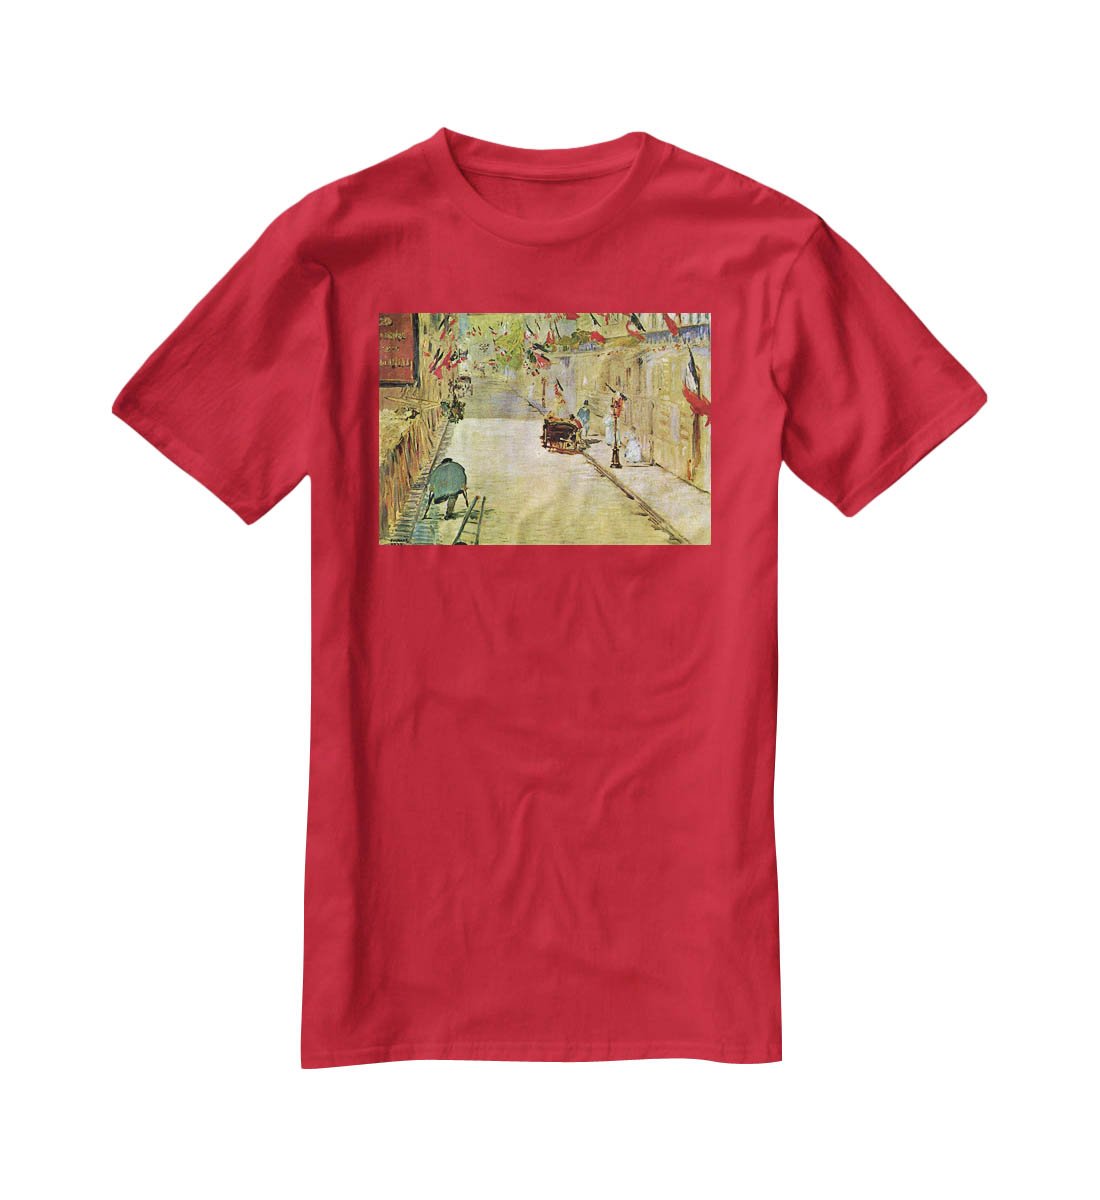 Rue Mosnier with Flags by Manet T-Shirt - Canvas Art Rocks - 4